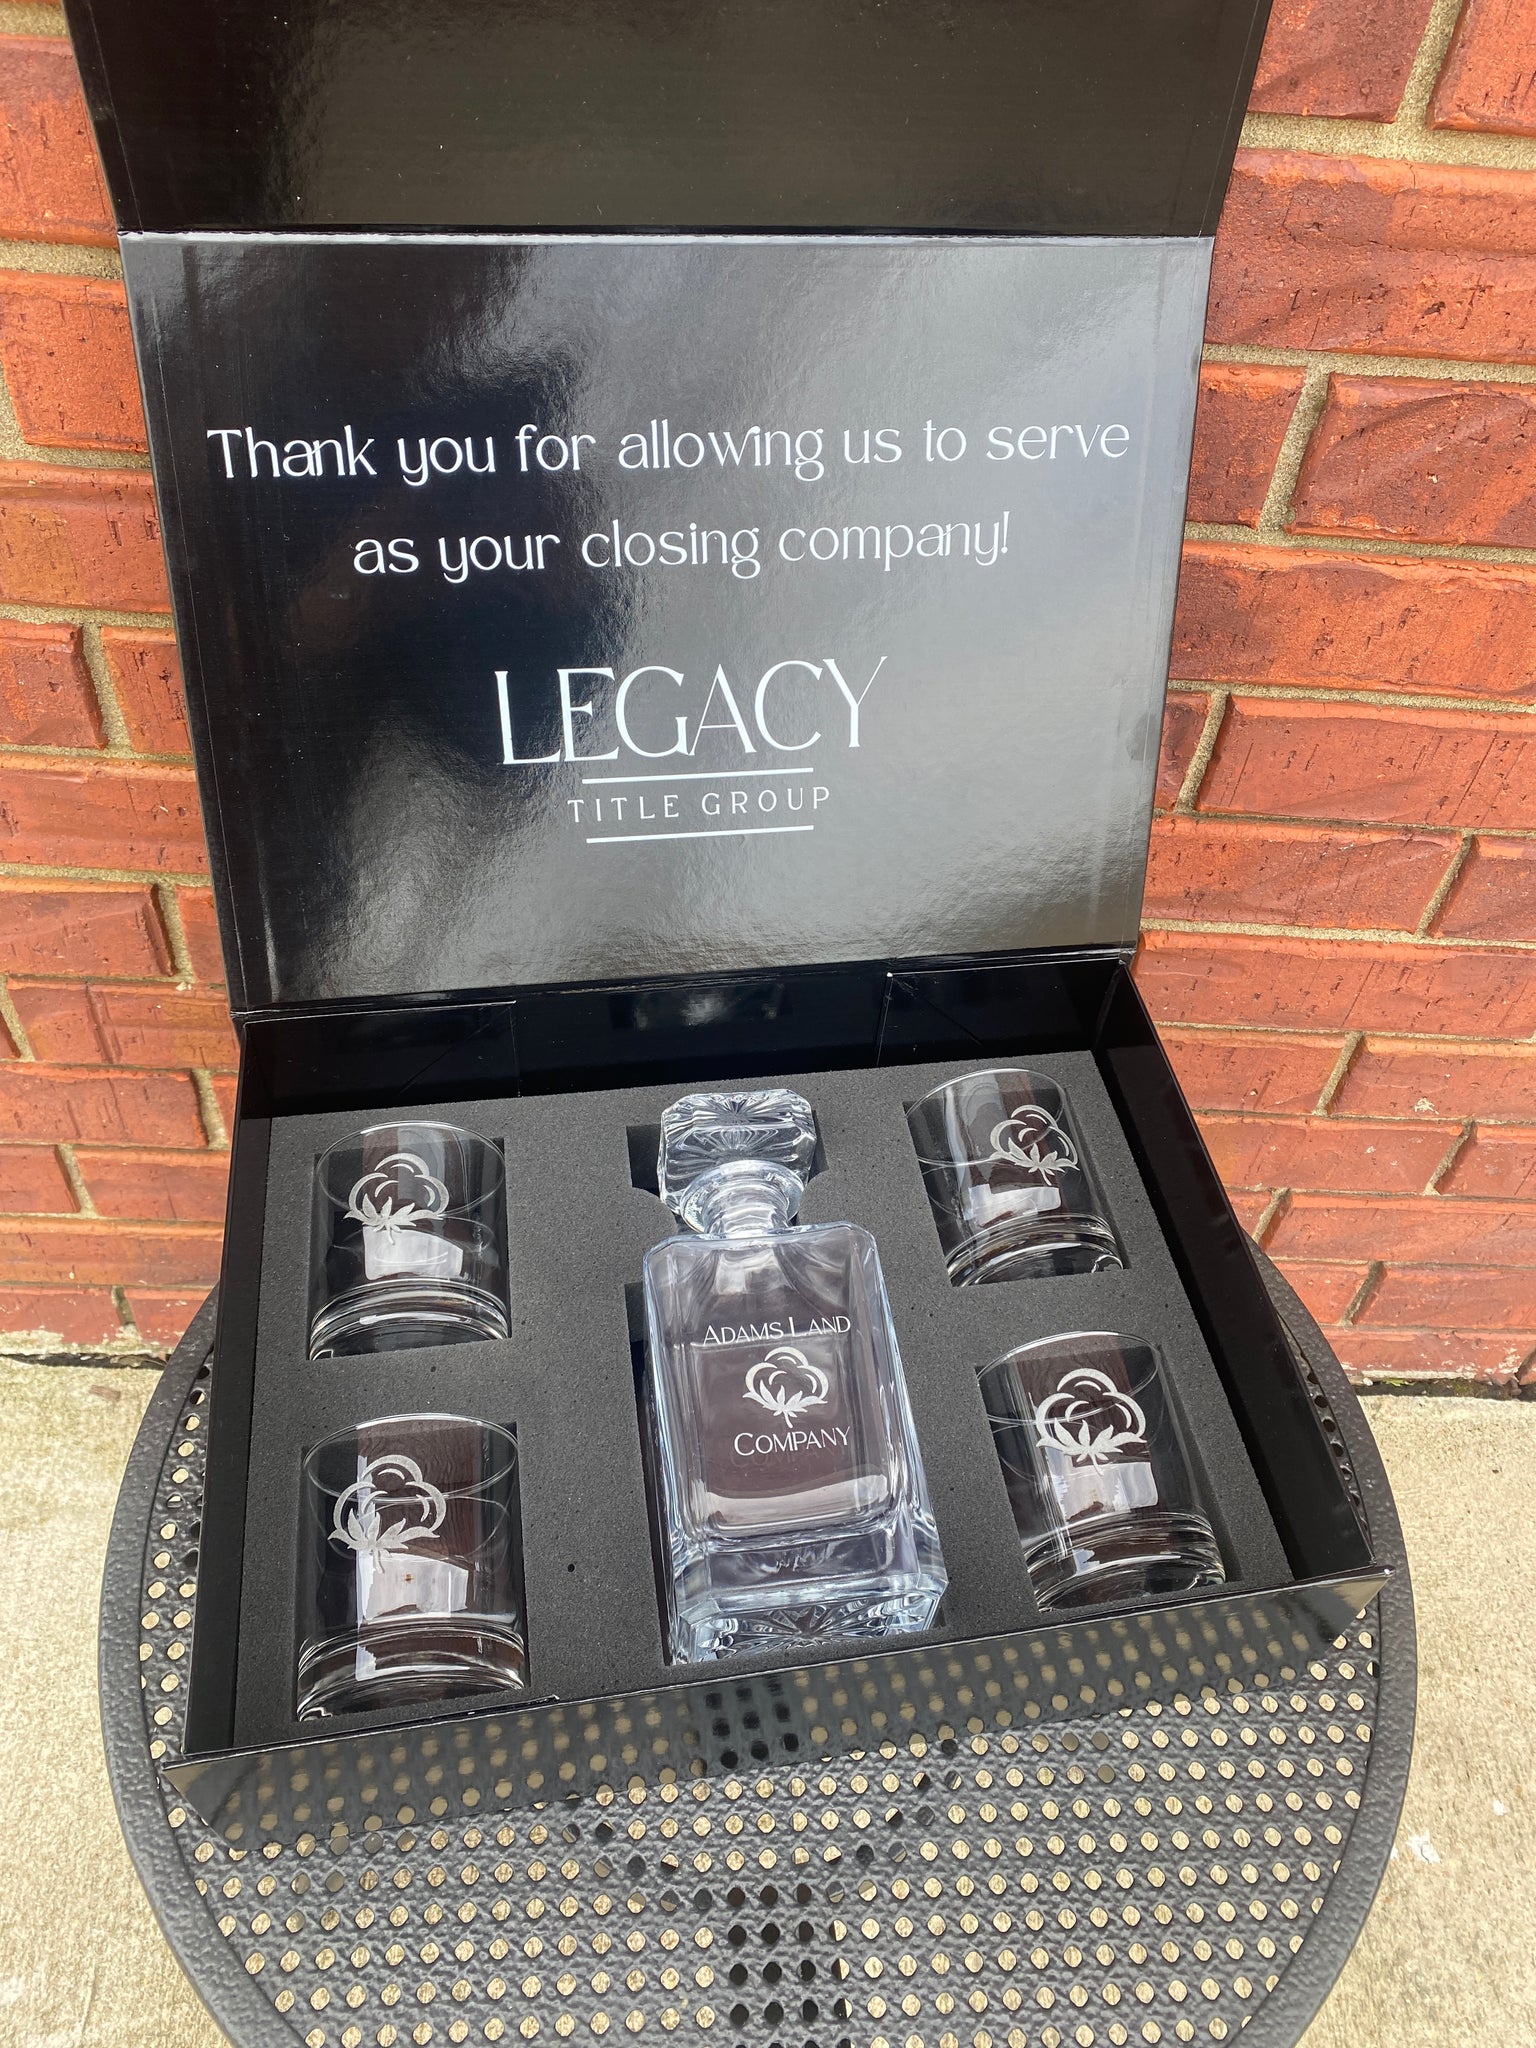 Personalized Whiskey Decanter Set with Luxury Gift Box , Gifts for